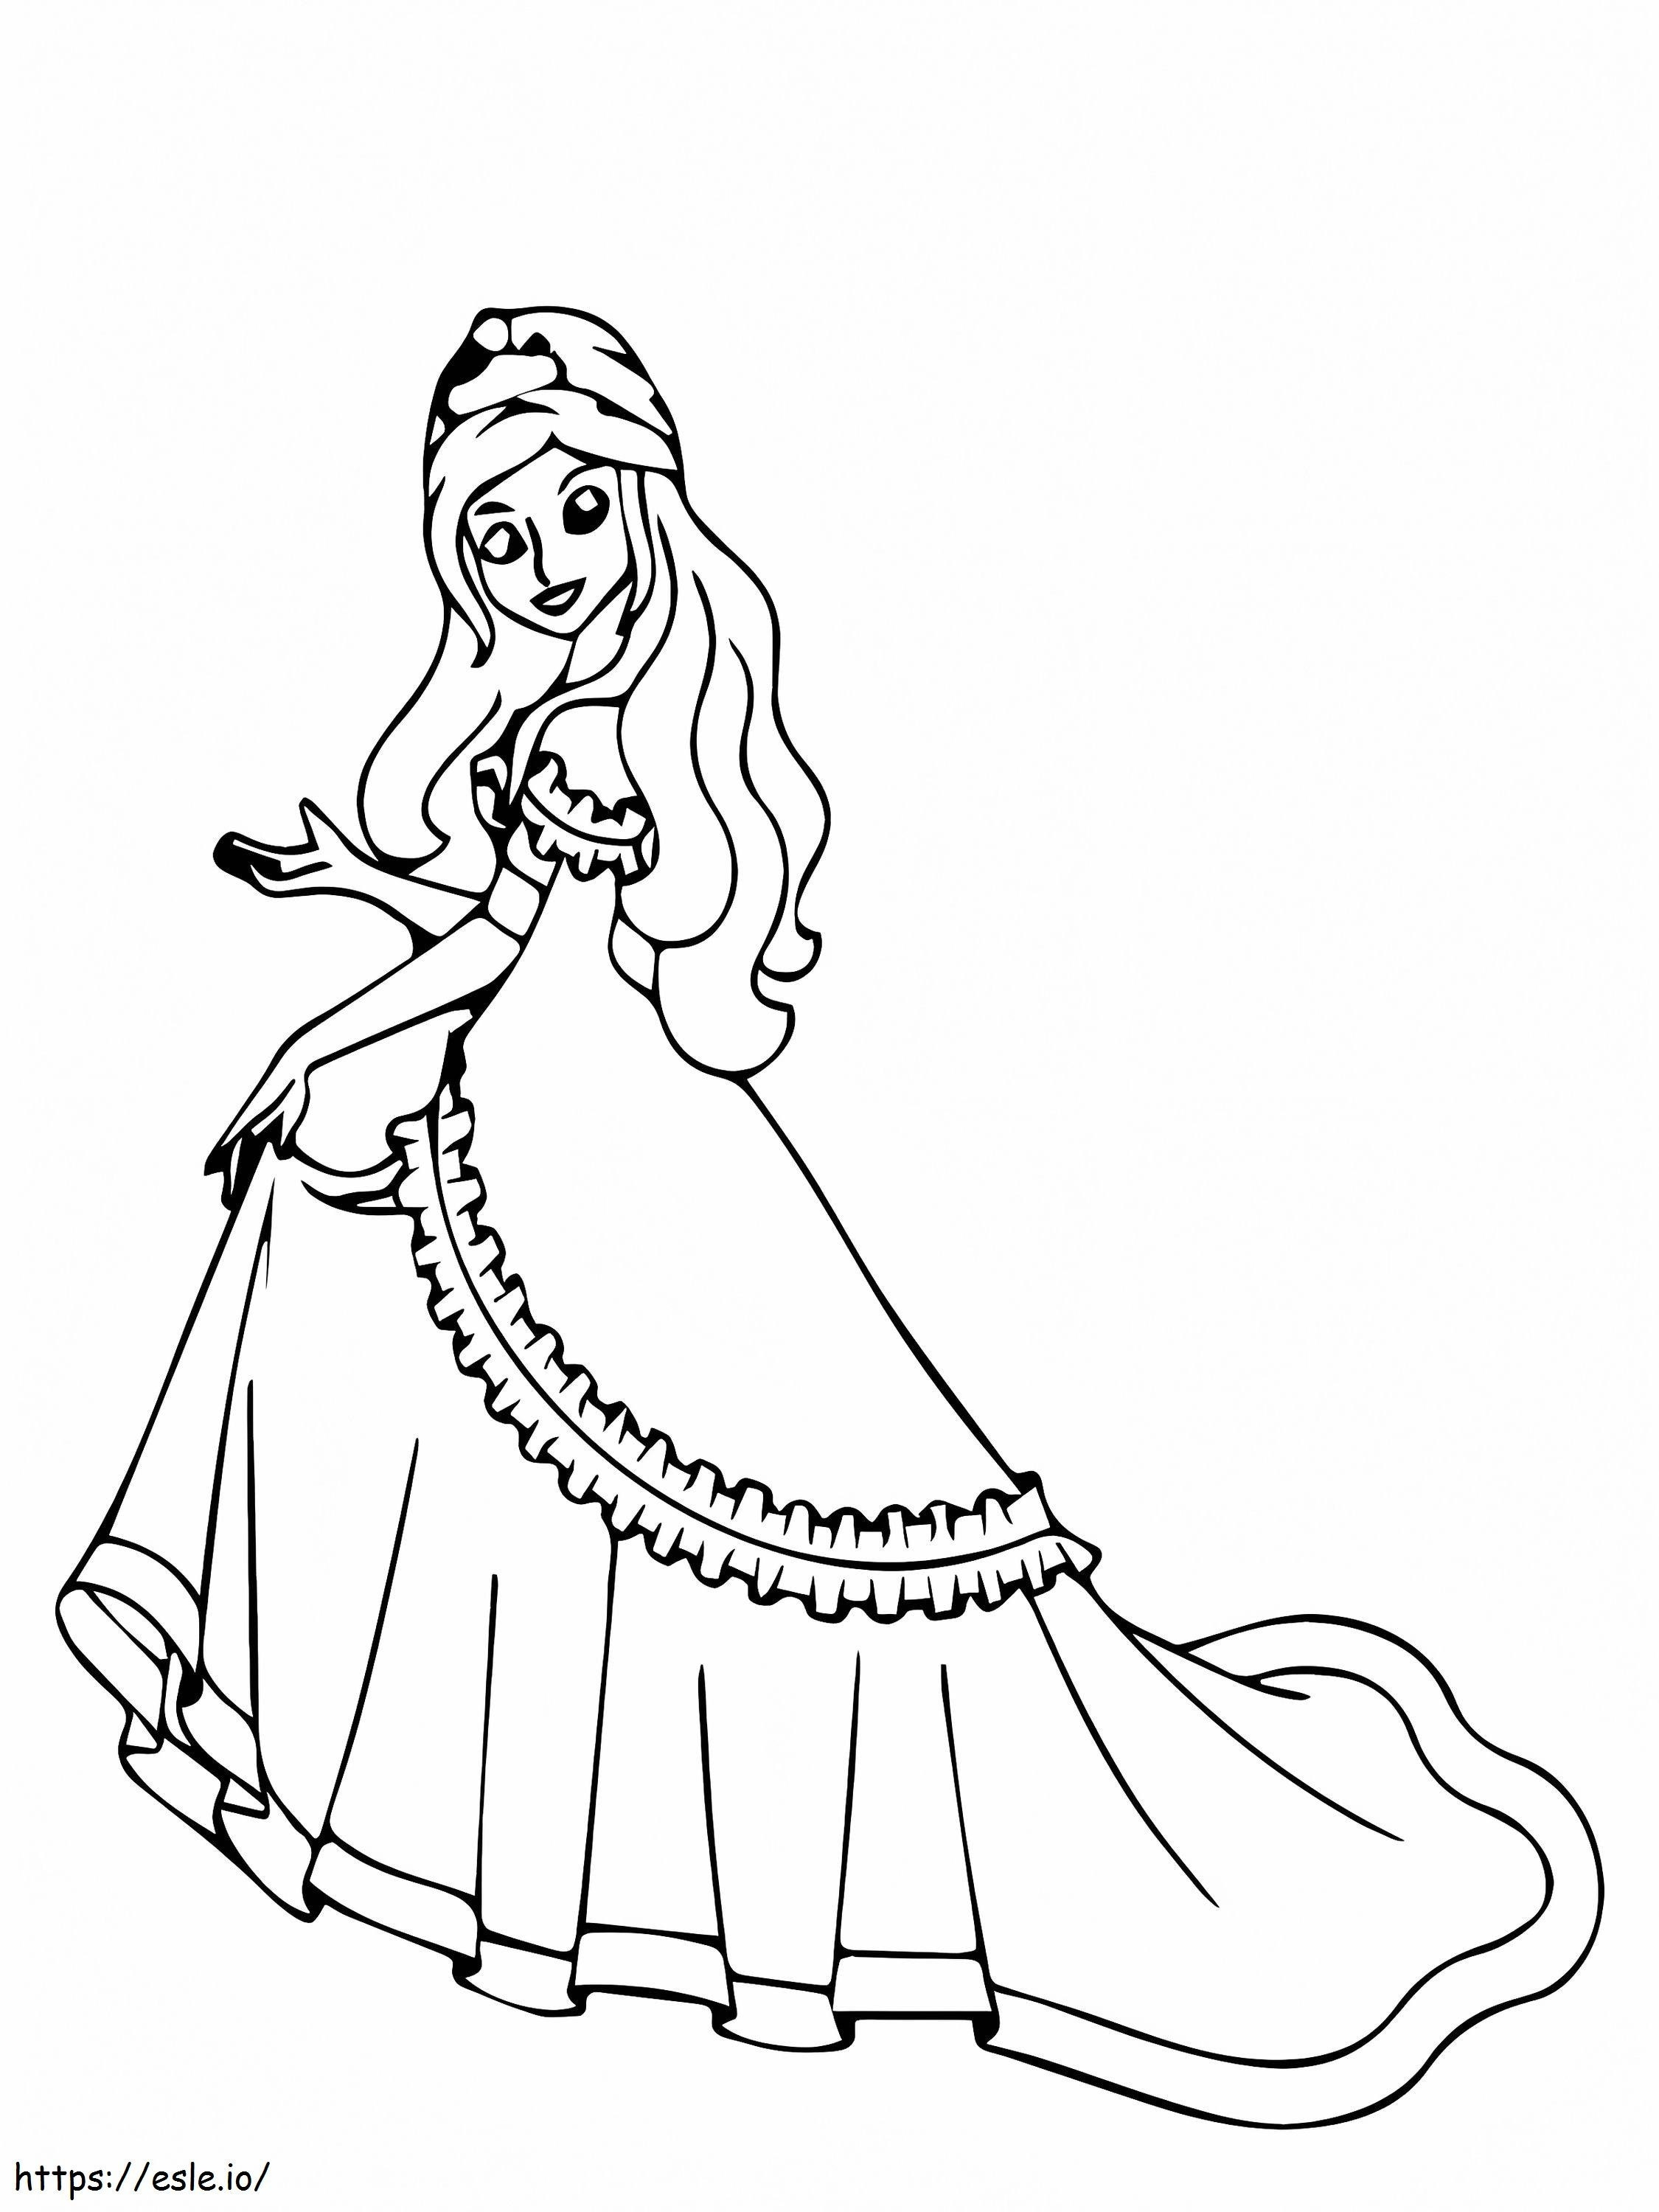 Charming Princess And The Pea coloring page